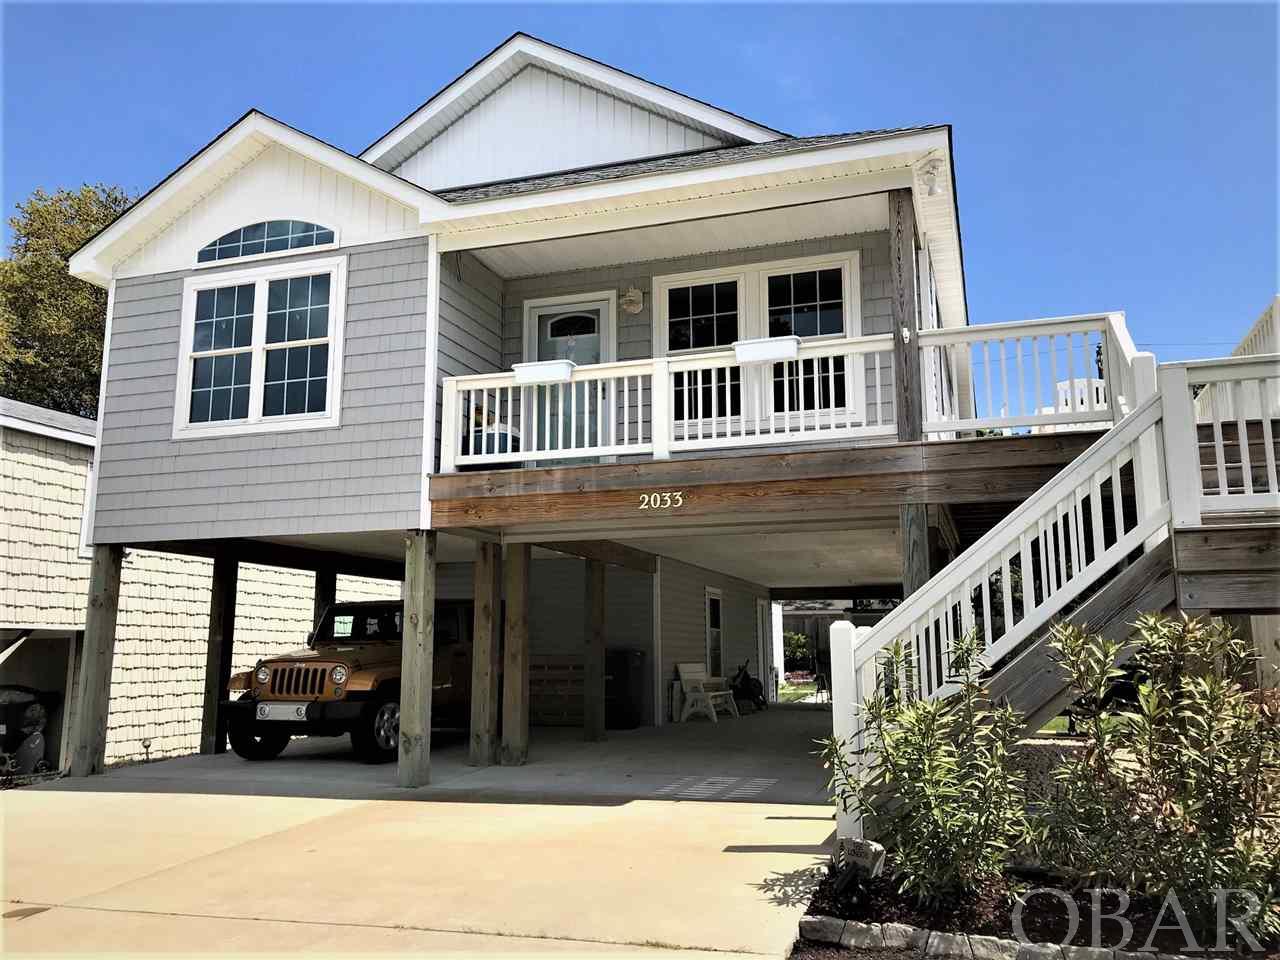 2033 Yorktown Street Lot 1342 Outer Banks Home Listings - Holleay Parcker - Spinnaker Realty Outer Banks (OBX) Real Estate